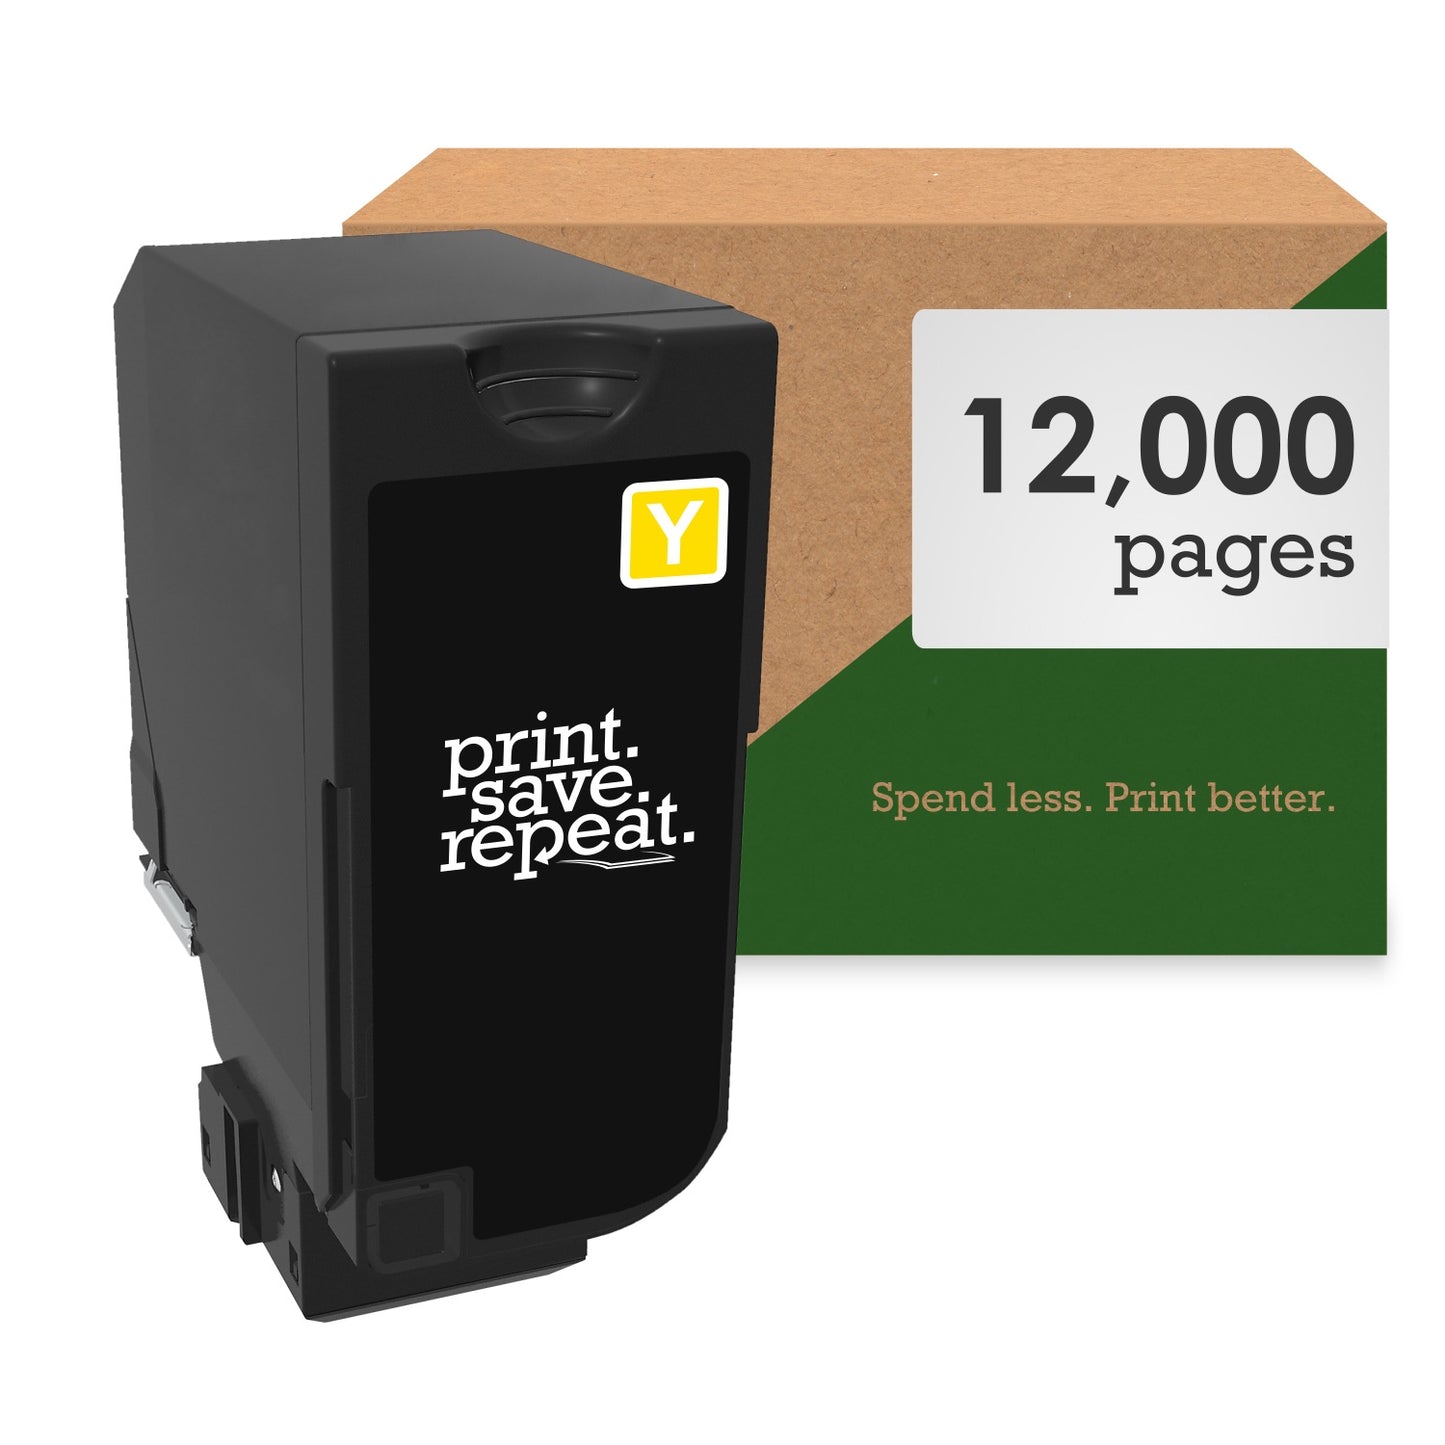 Print.Save.Repeat. Lexmark 74C1HY0 Yellow High Yield Toner Cartridge for CS725 [12,000 Pages]